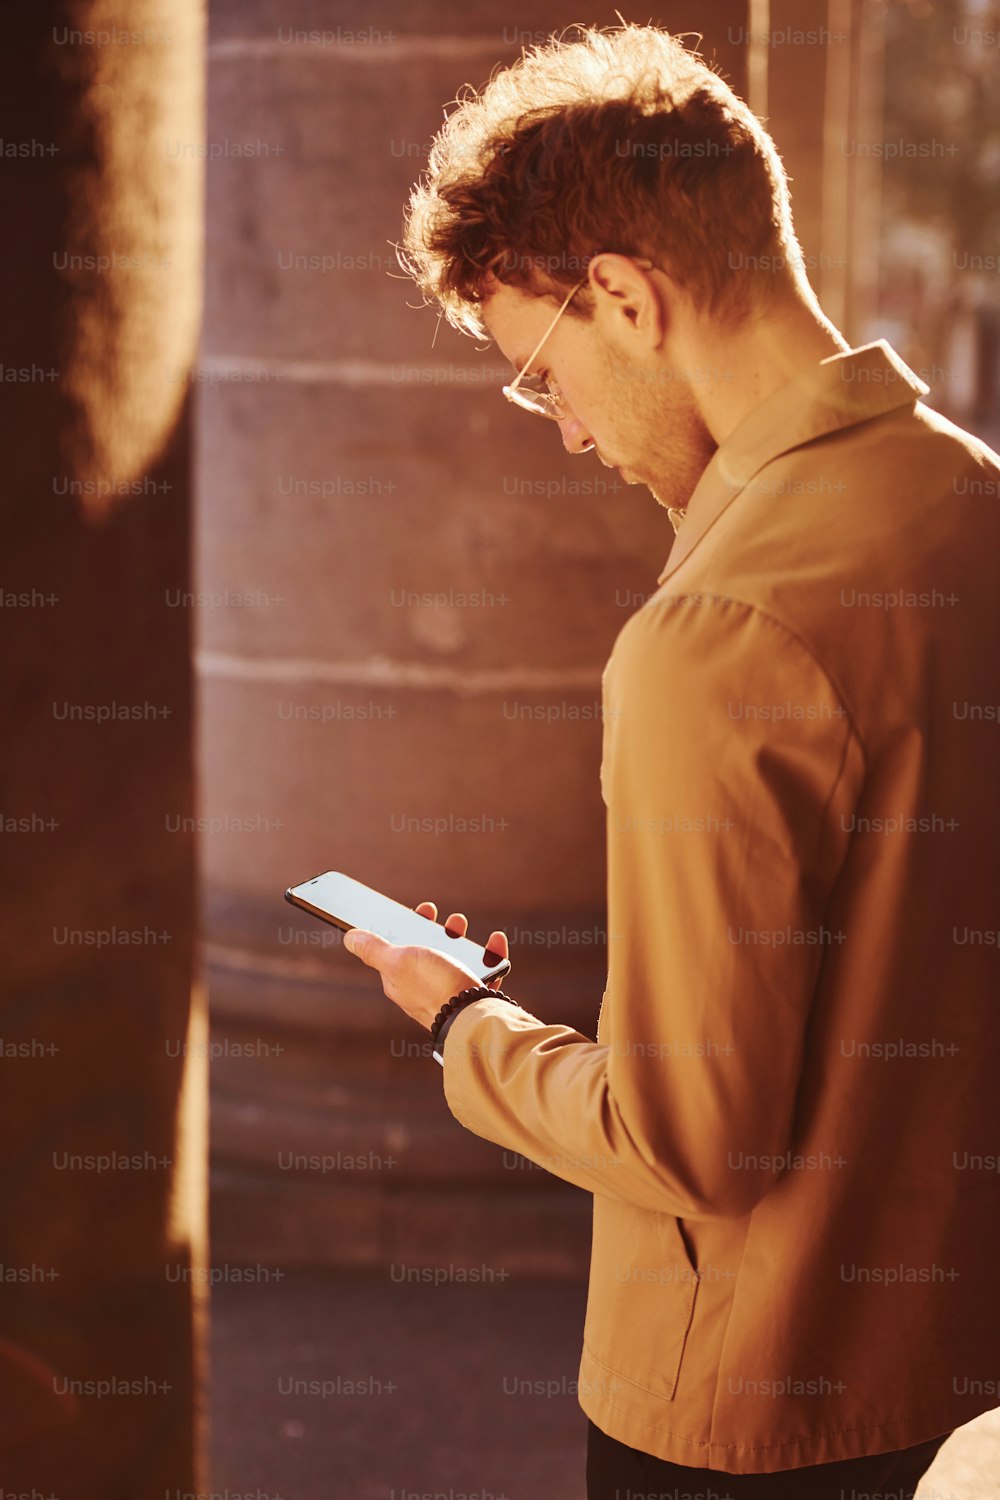 Nice sunshine. Holding phone in hand. Elegant young man in formal classy clothes outdoors in the city.